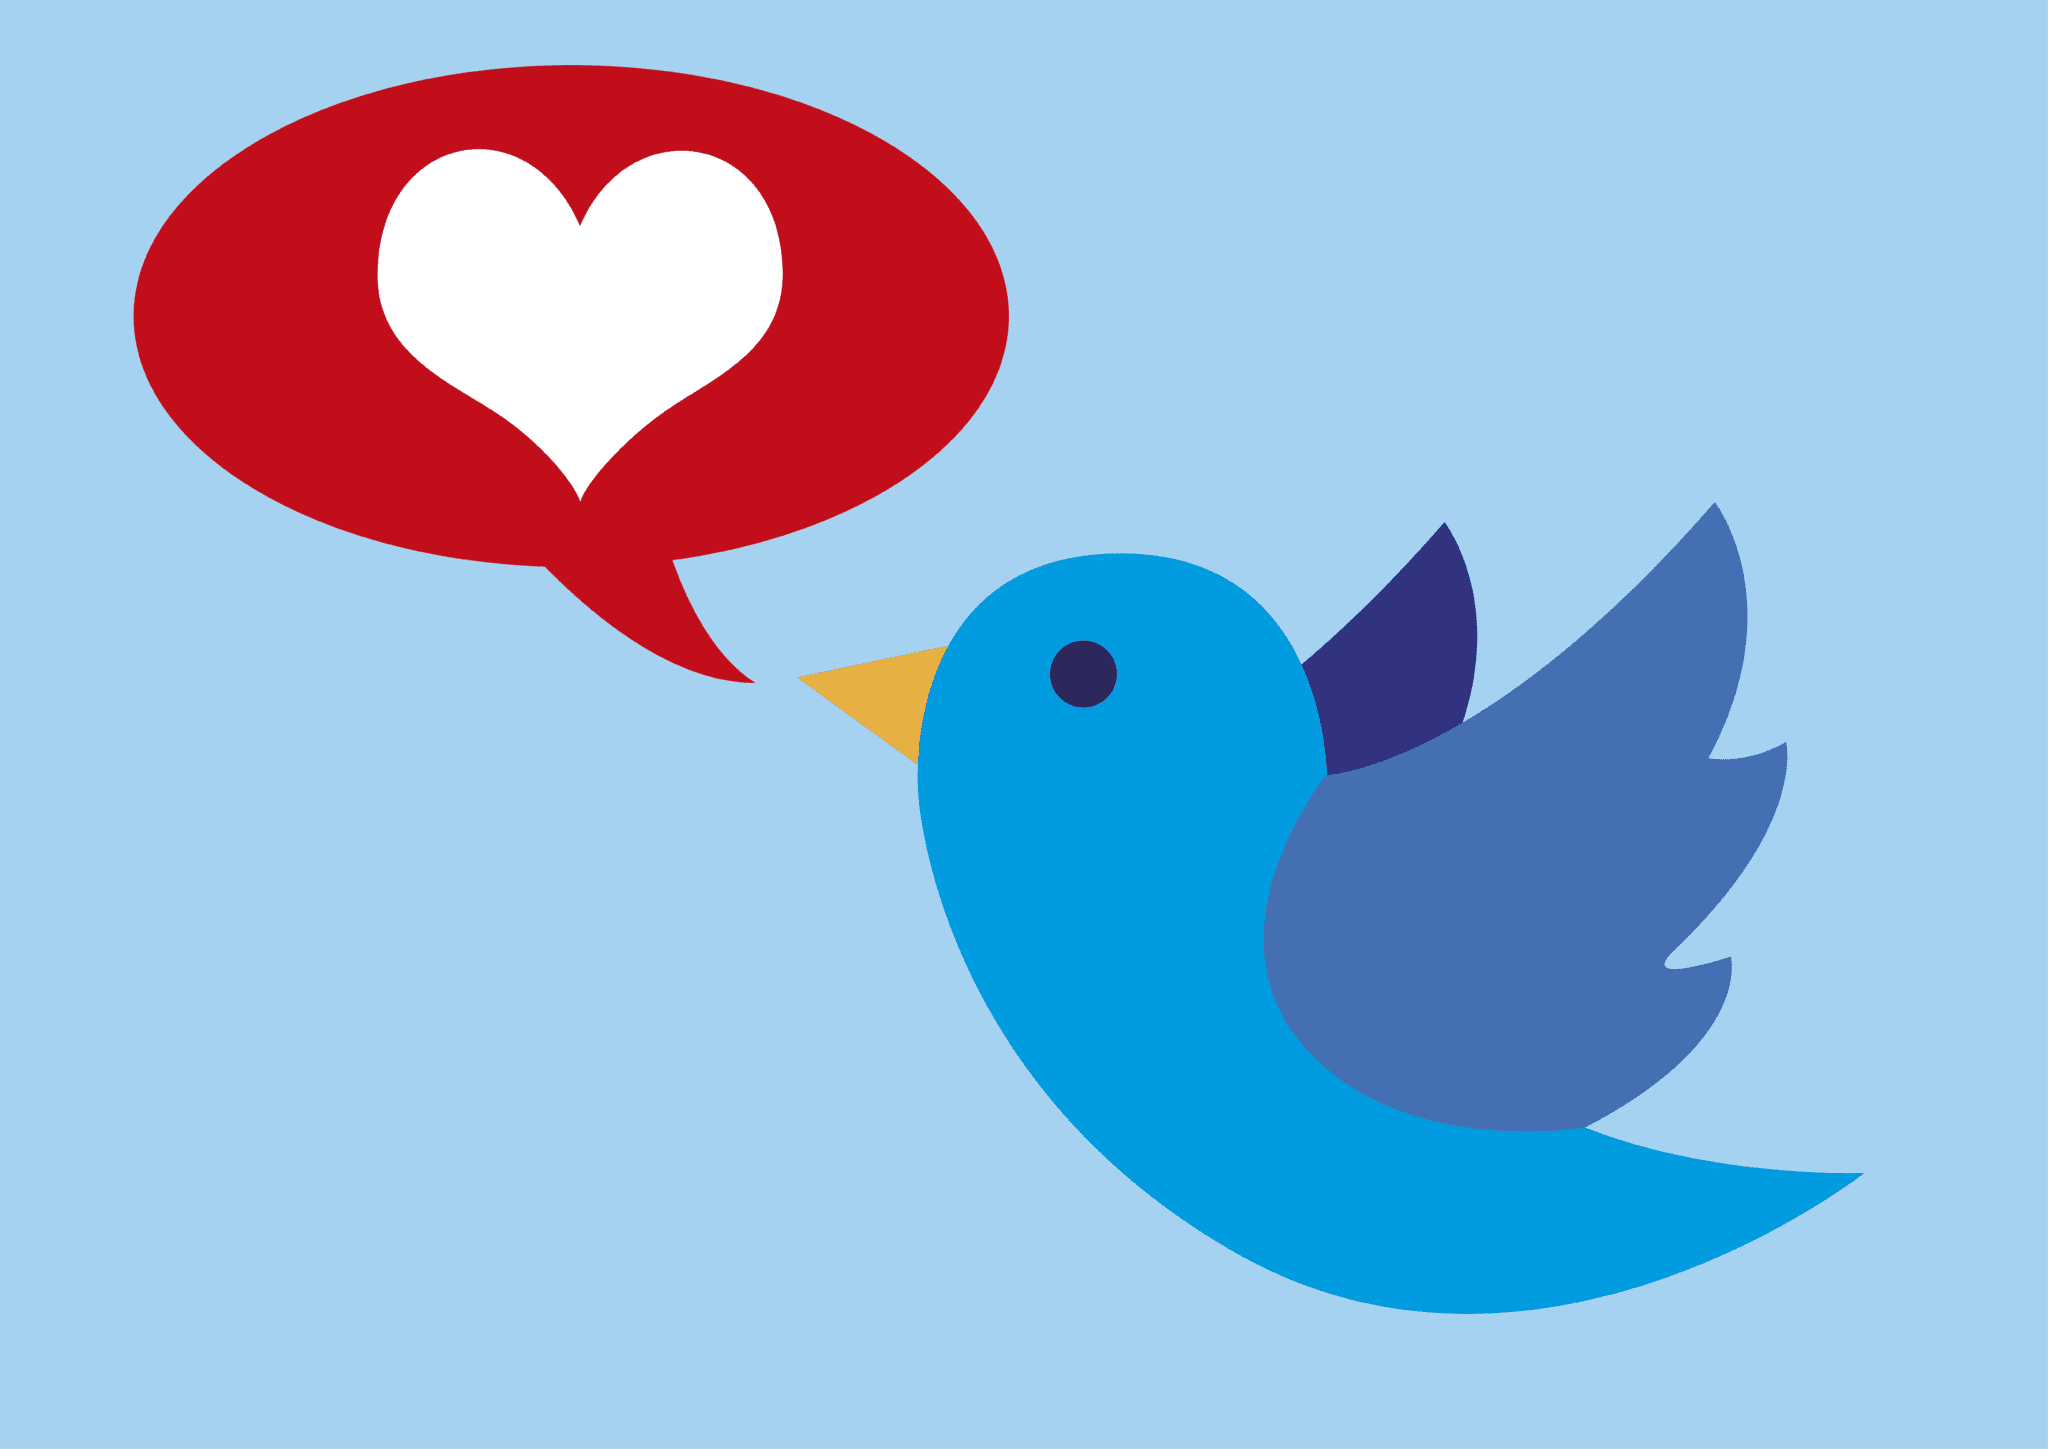 twitter logo with a red heart icon